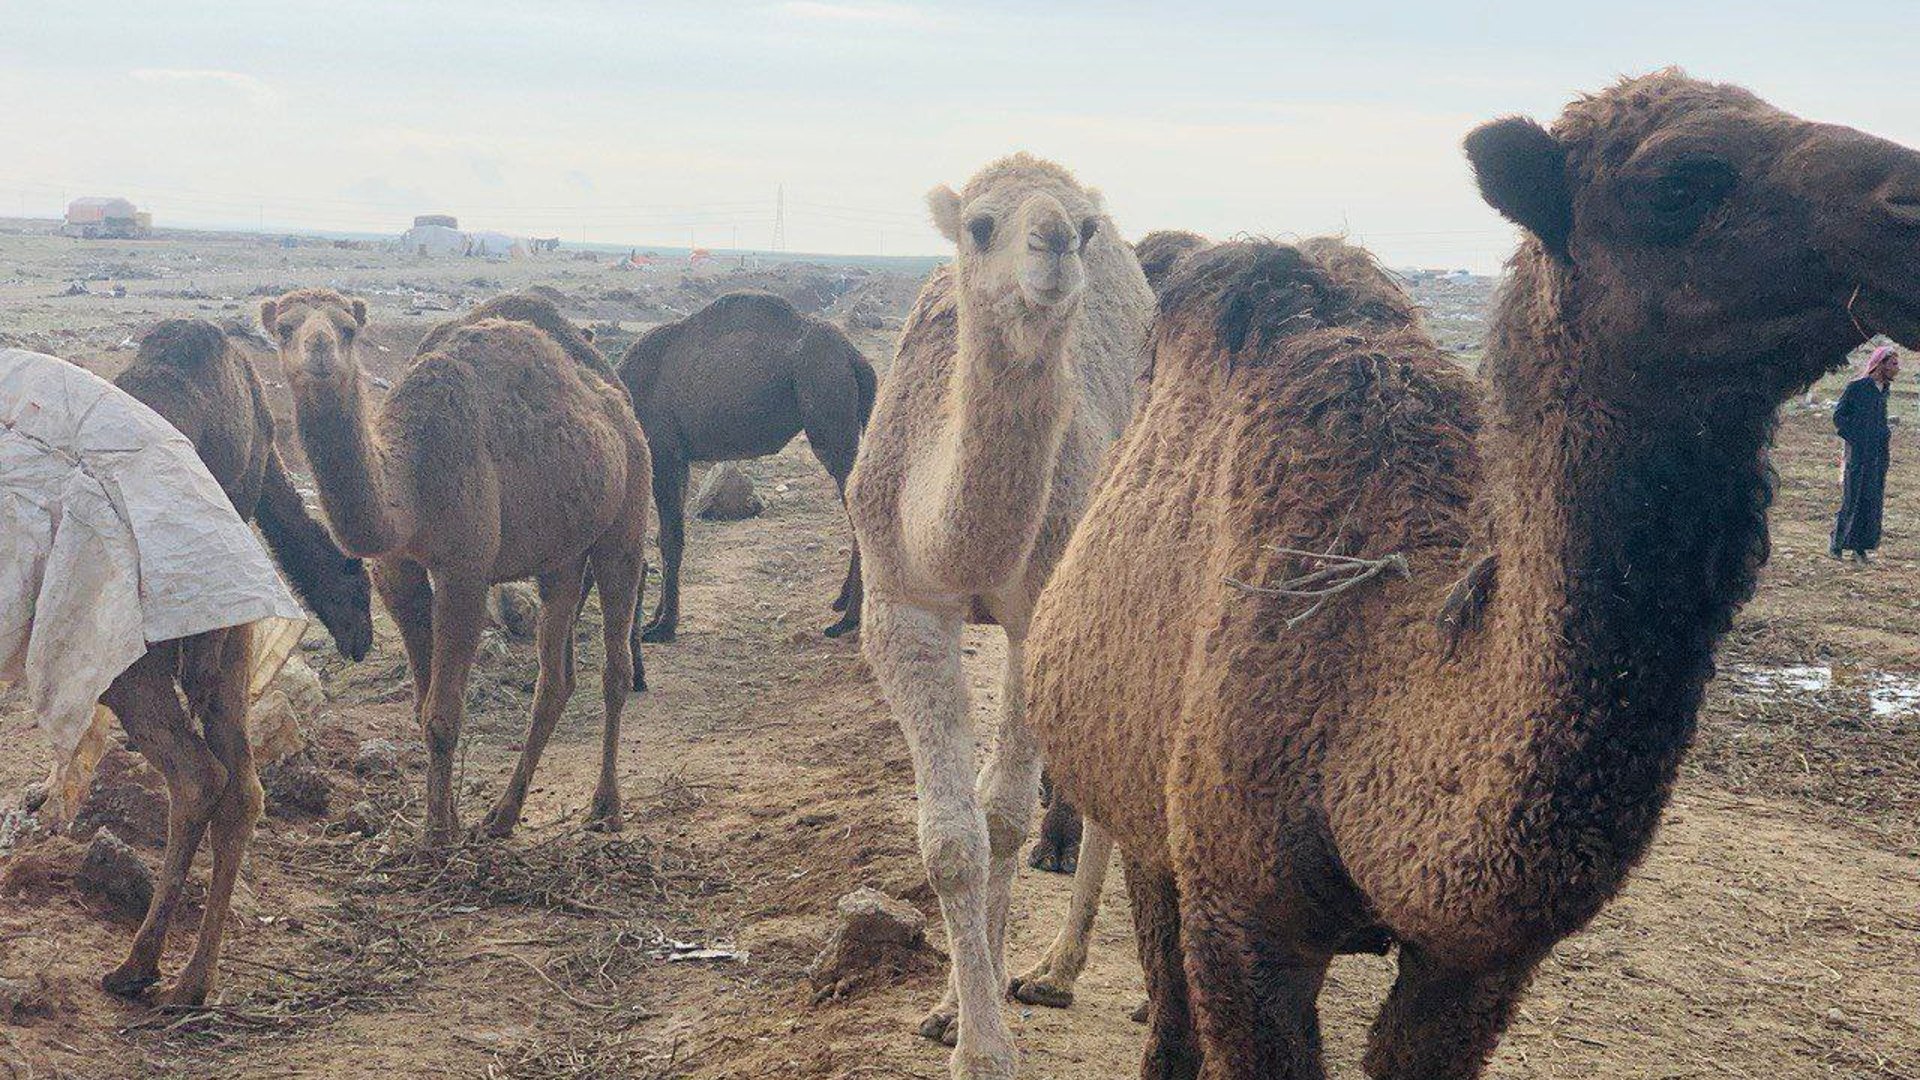 Nomadic camel drivers move to lush pastures in western Mosul after recent rains